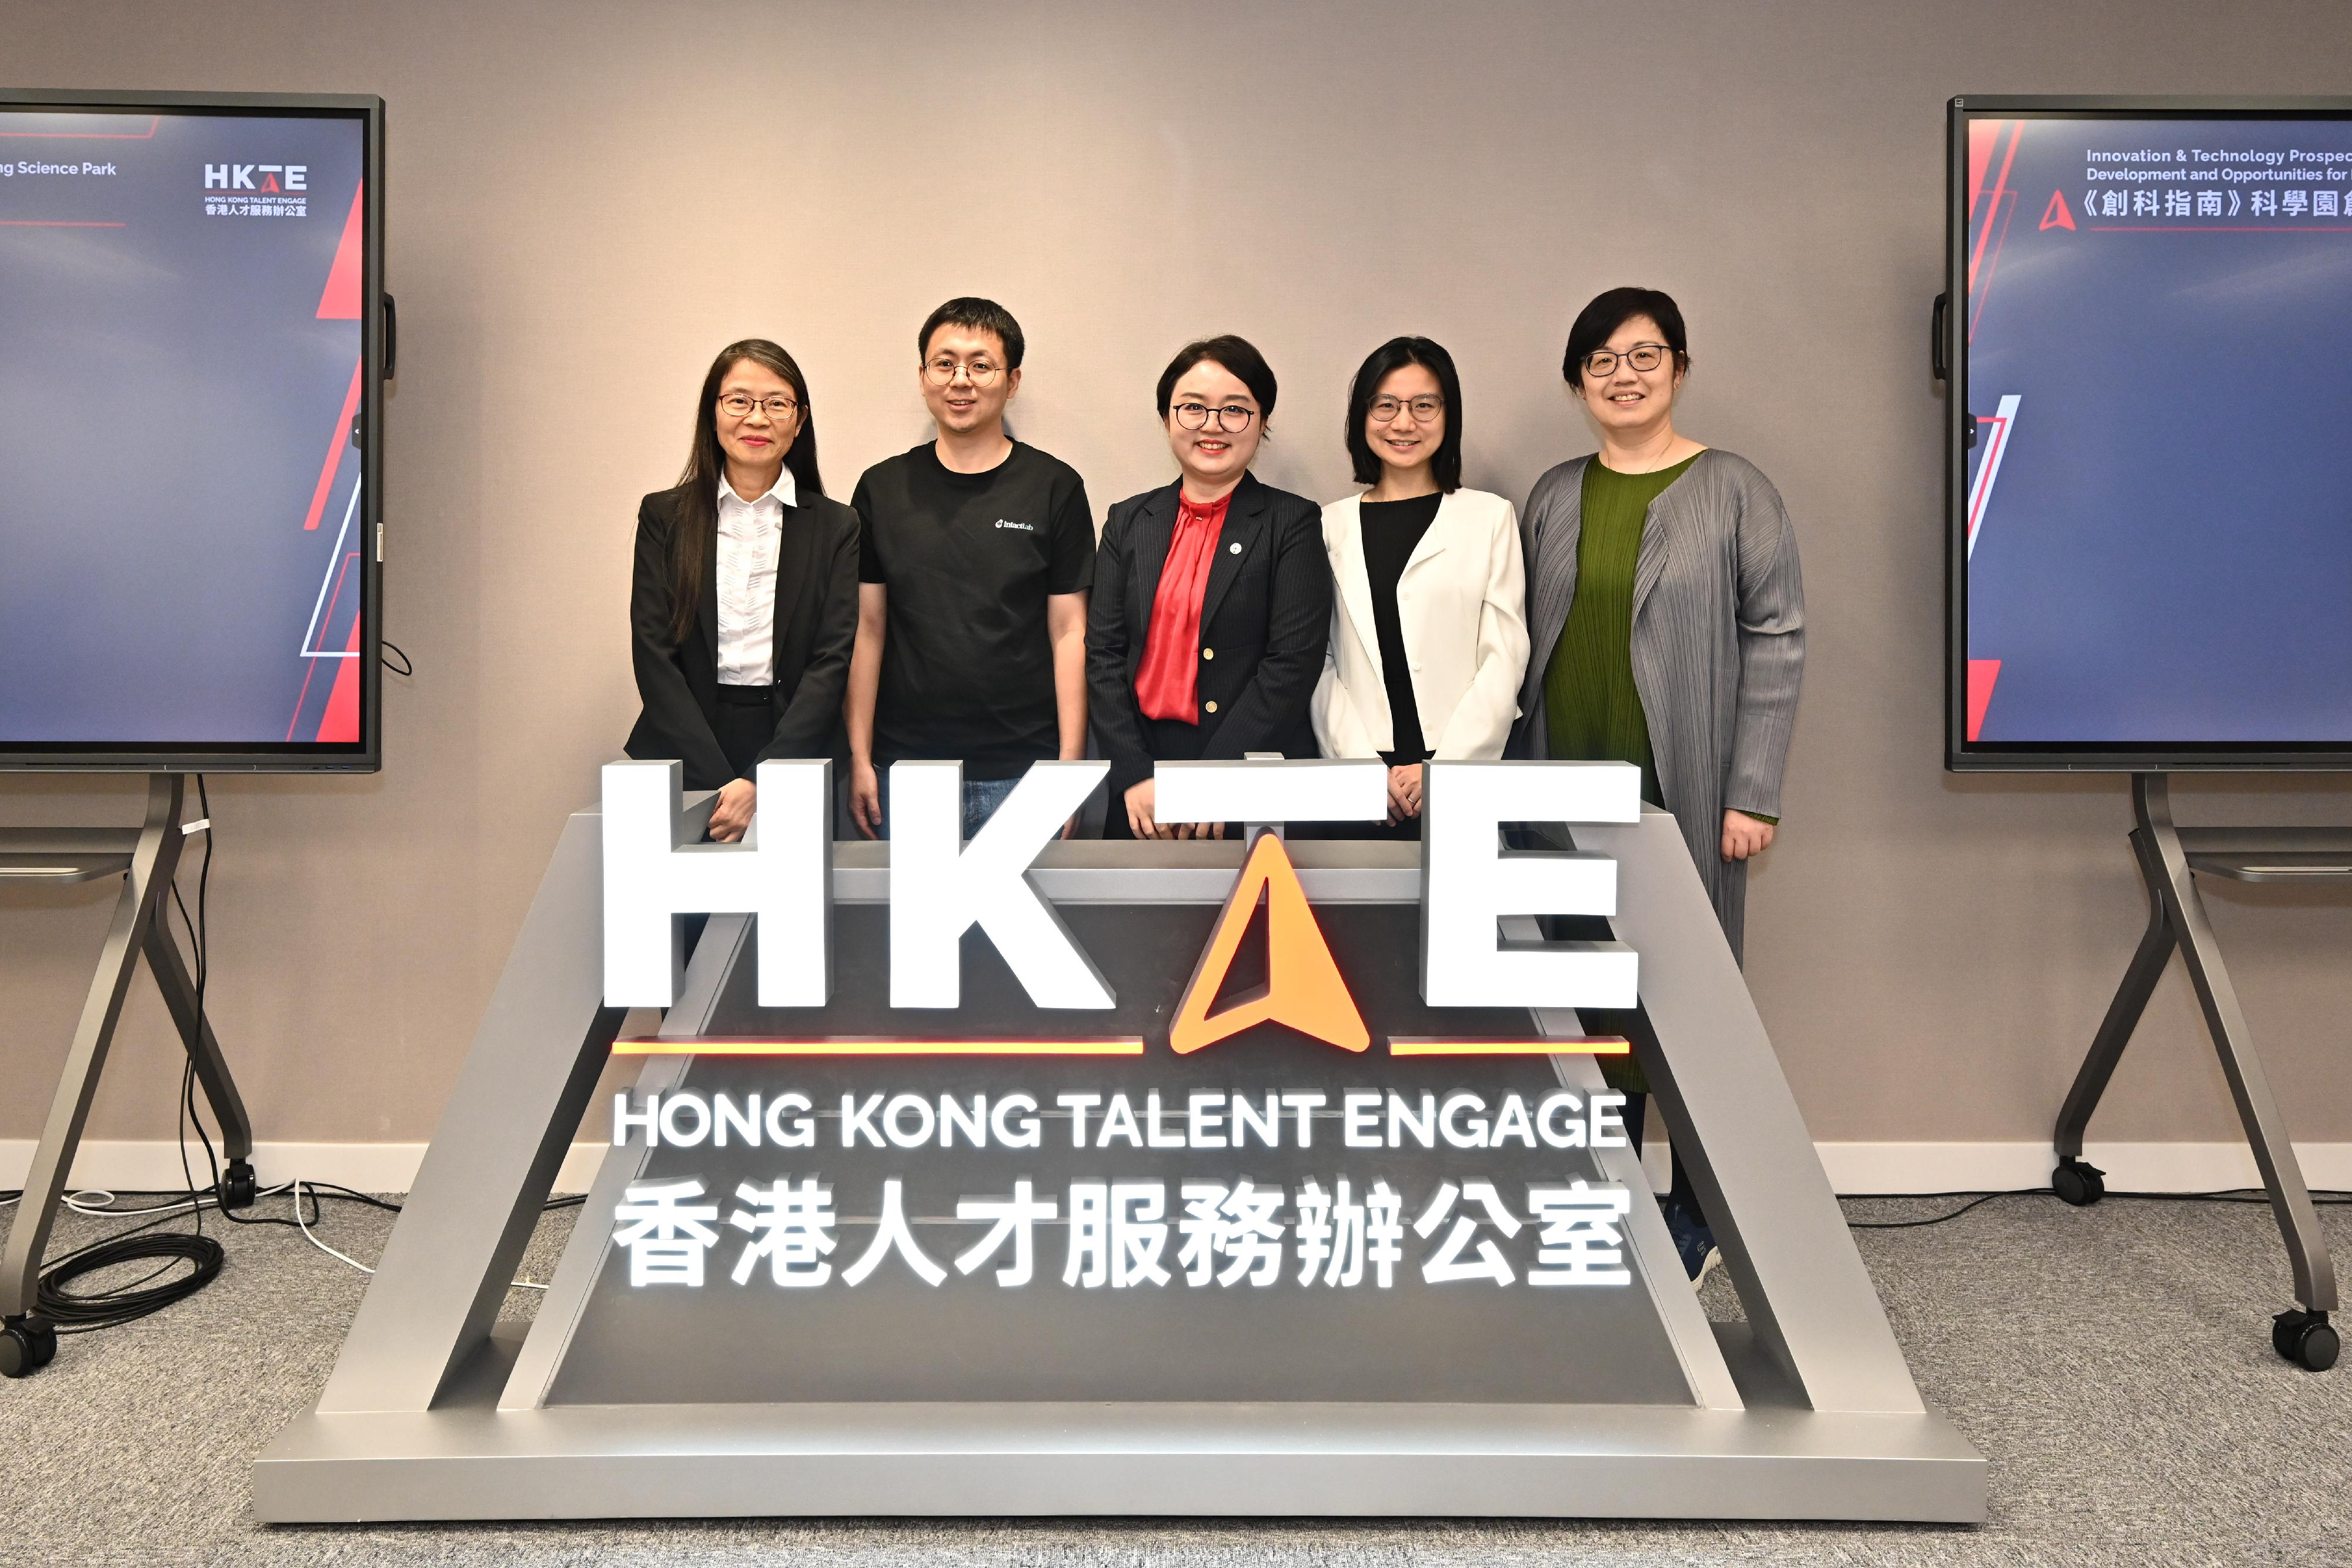 Hong Kong Talent Engage (HKTE) hosted a themed seminar on innovation and technology (I&T) today (May 23) to delve into development opportunities for I&T talent in Hong Kong and support them to settle in the city. Photo shows the Deputy Director of HKTE, Ms Anna Au (first left), and speakers.